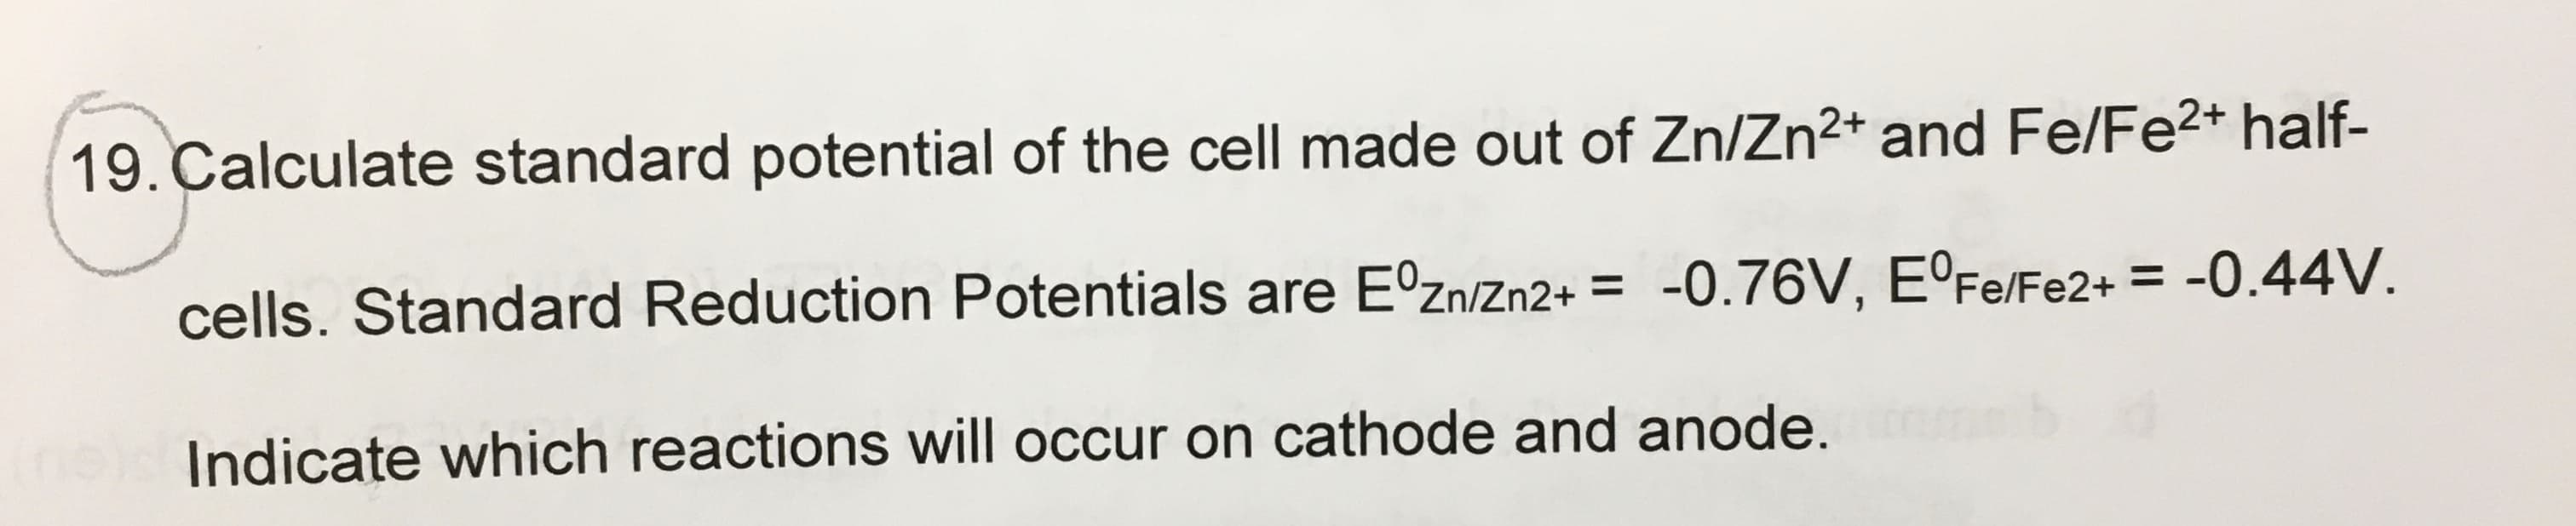 19. Calculate standard potential of the cell made out of Zn/Zn2+ and Fe/Fe2+ half-
cells. Standard Reduction Potentials are EºZn/Zn2+ = -O.76V, E°Fe/Fe2+ = -0.44V.
Indicate which reactions will occur on cathode and anode.
